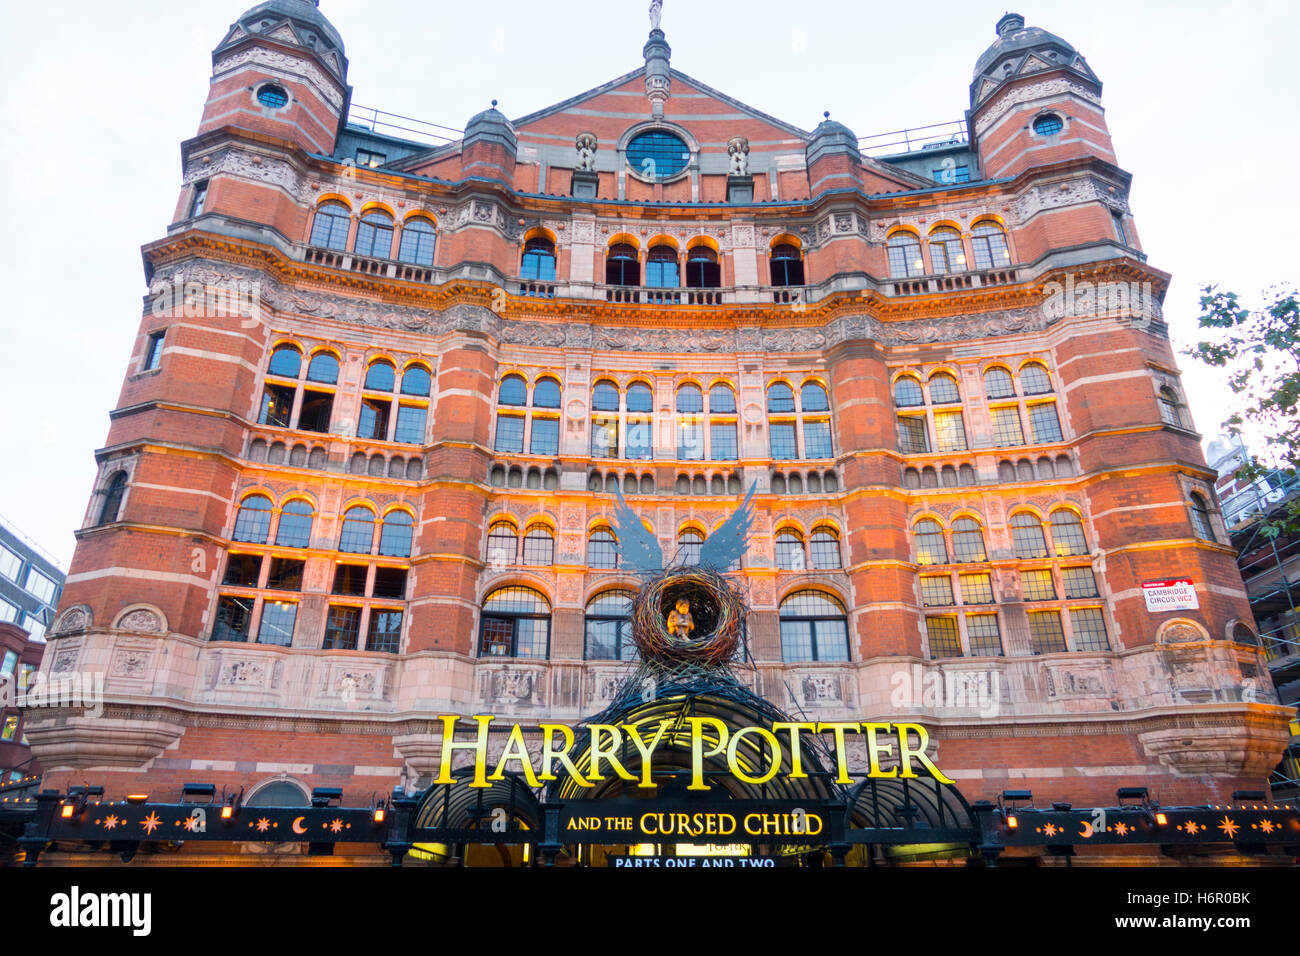 The famous Harry Potter musical in London at Palace Theatre Cambridge